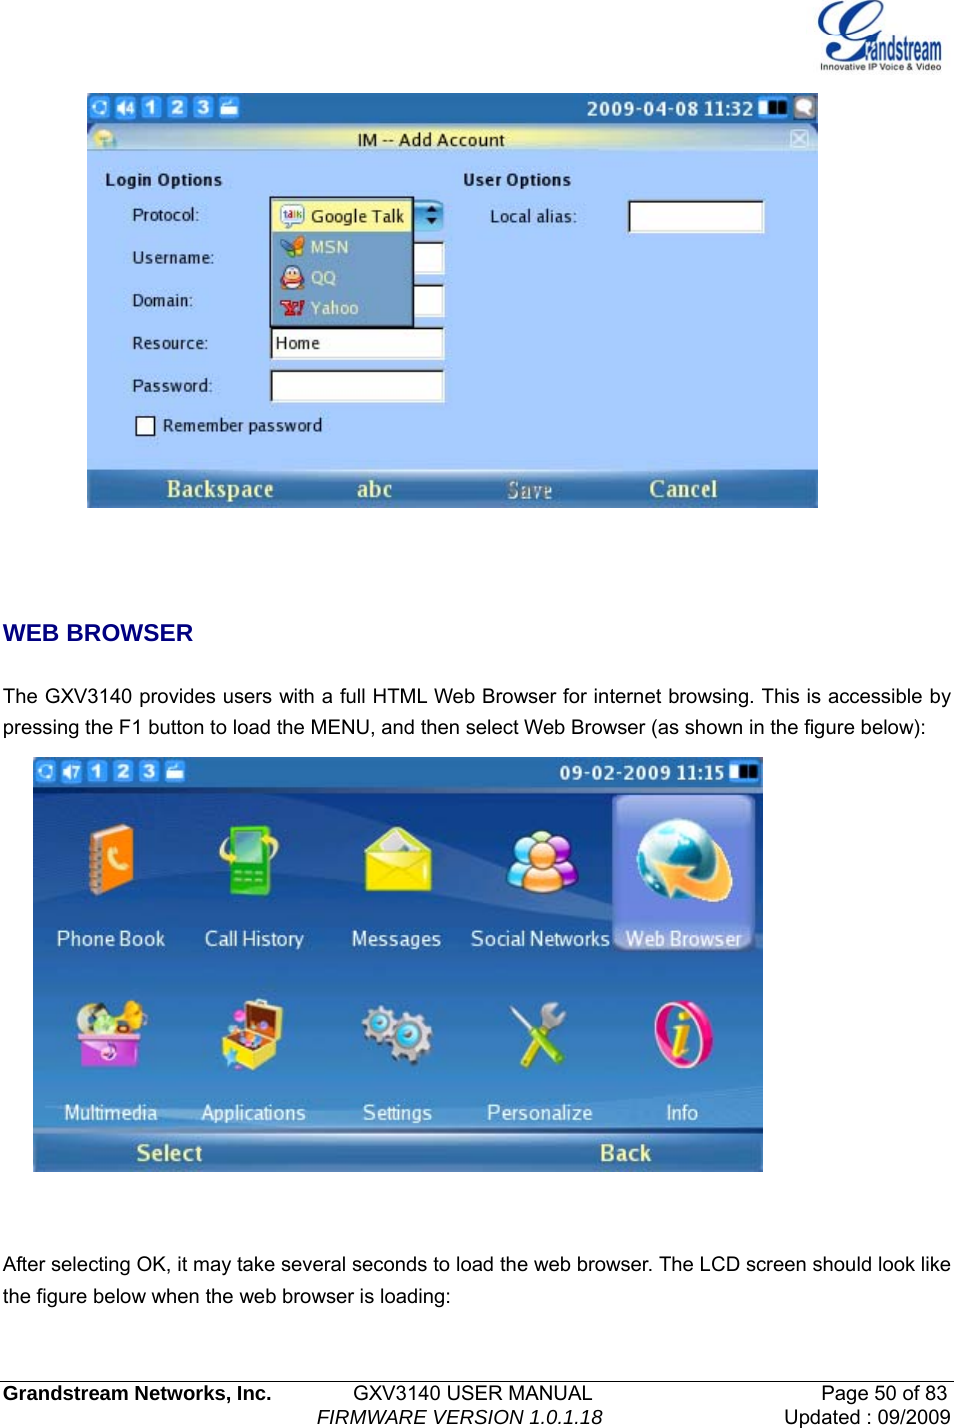   Grandstream Networks, Inc.        GXV3140 USER MANUAL                       Page 50 of 83                                FIRMWARE VERSION 1.0.1.18 Updated : 09/2009      WEB BROWSER  The GXV3140 provides users with a full HTML Web Browser for internet browsing. This is accessible by pressing the F1 button to load the MENU, and then select Web Browser (as shown in the figure below):    After selecting OK, it may take several seconds to load the web browser. The LCD screen should look like the figure below when the web browser is loading: 